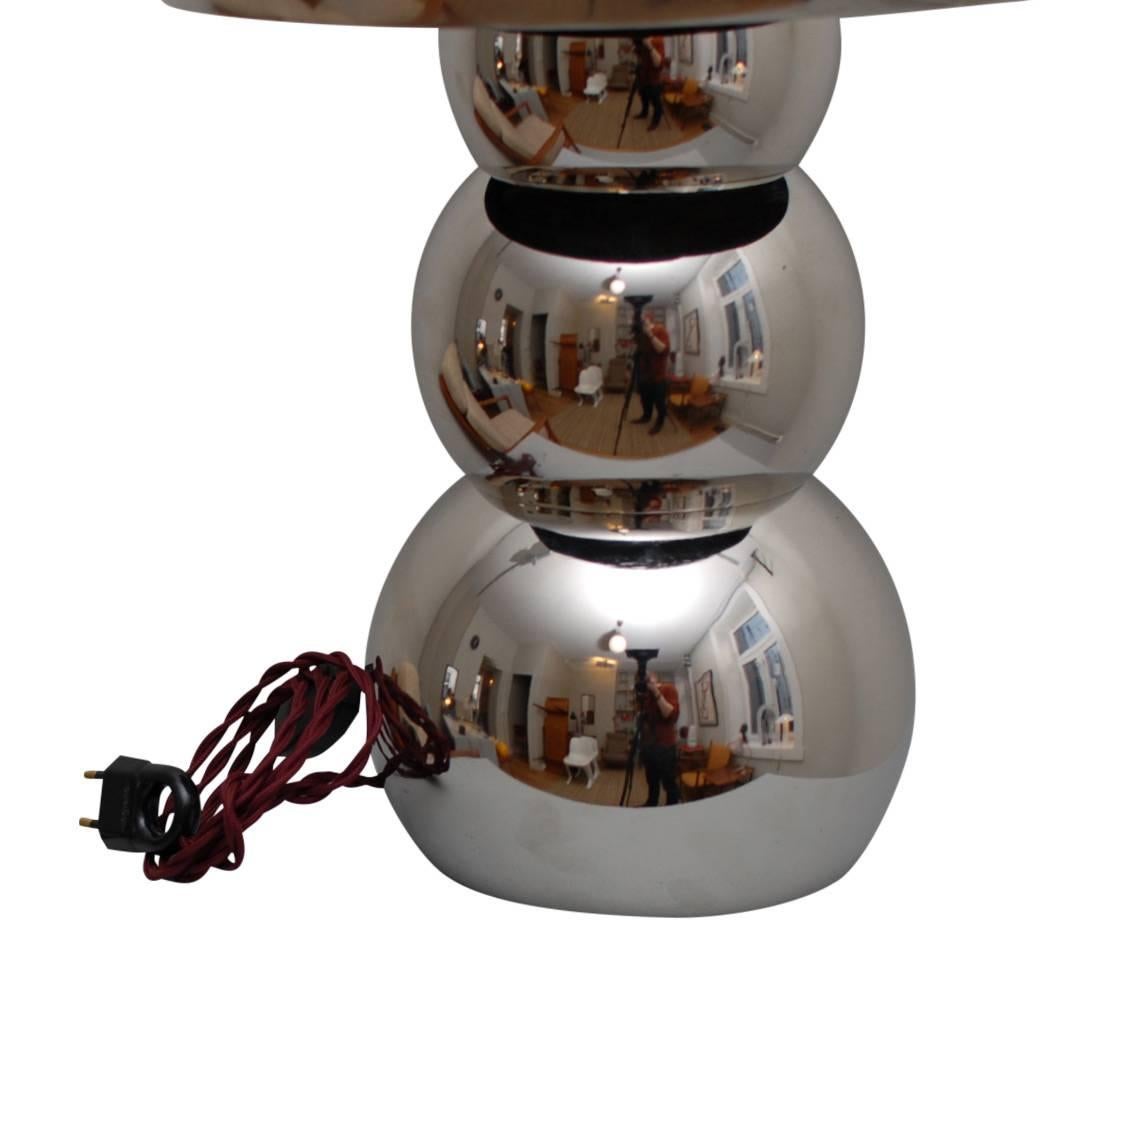 Mushrooms lamp in chrome alloy manufactured in France 1970s  reminiscent of Maison Charles creations. Consecutive spheres and large shade. Newly wired with fabric braided wire. 
